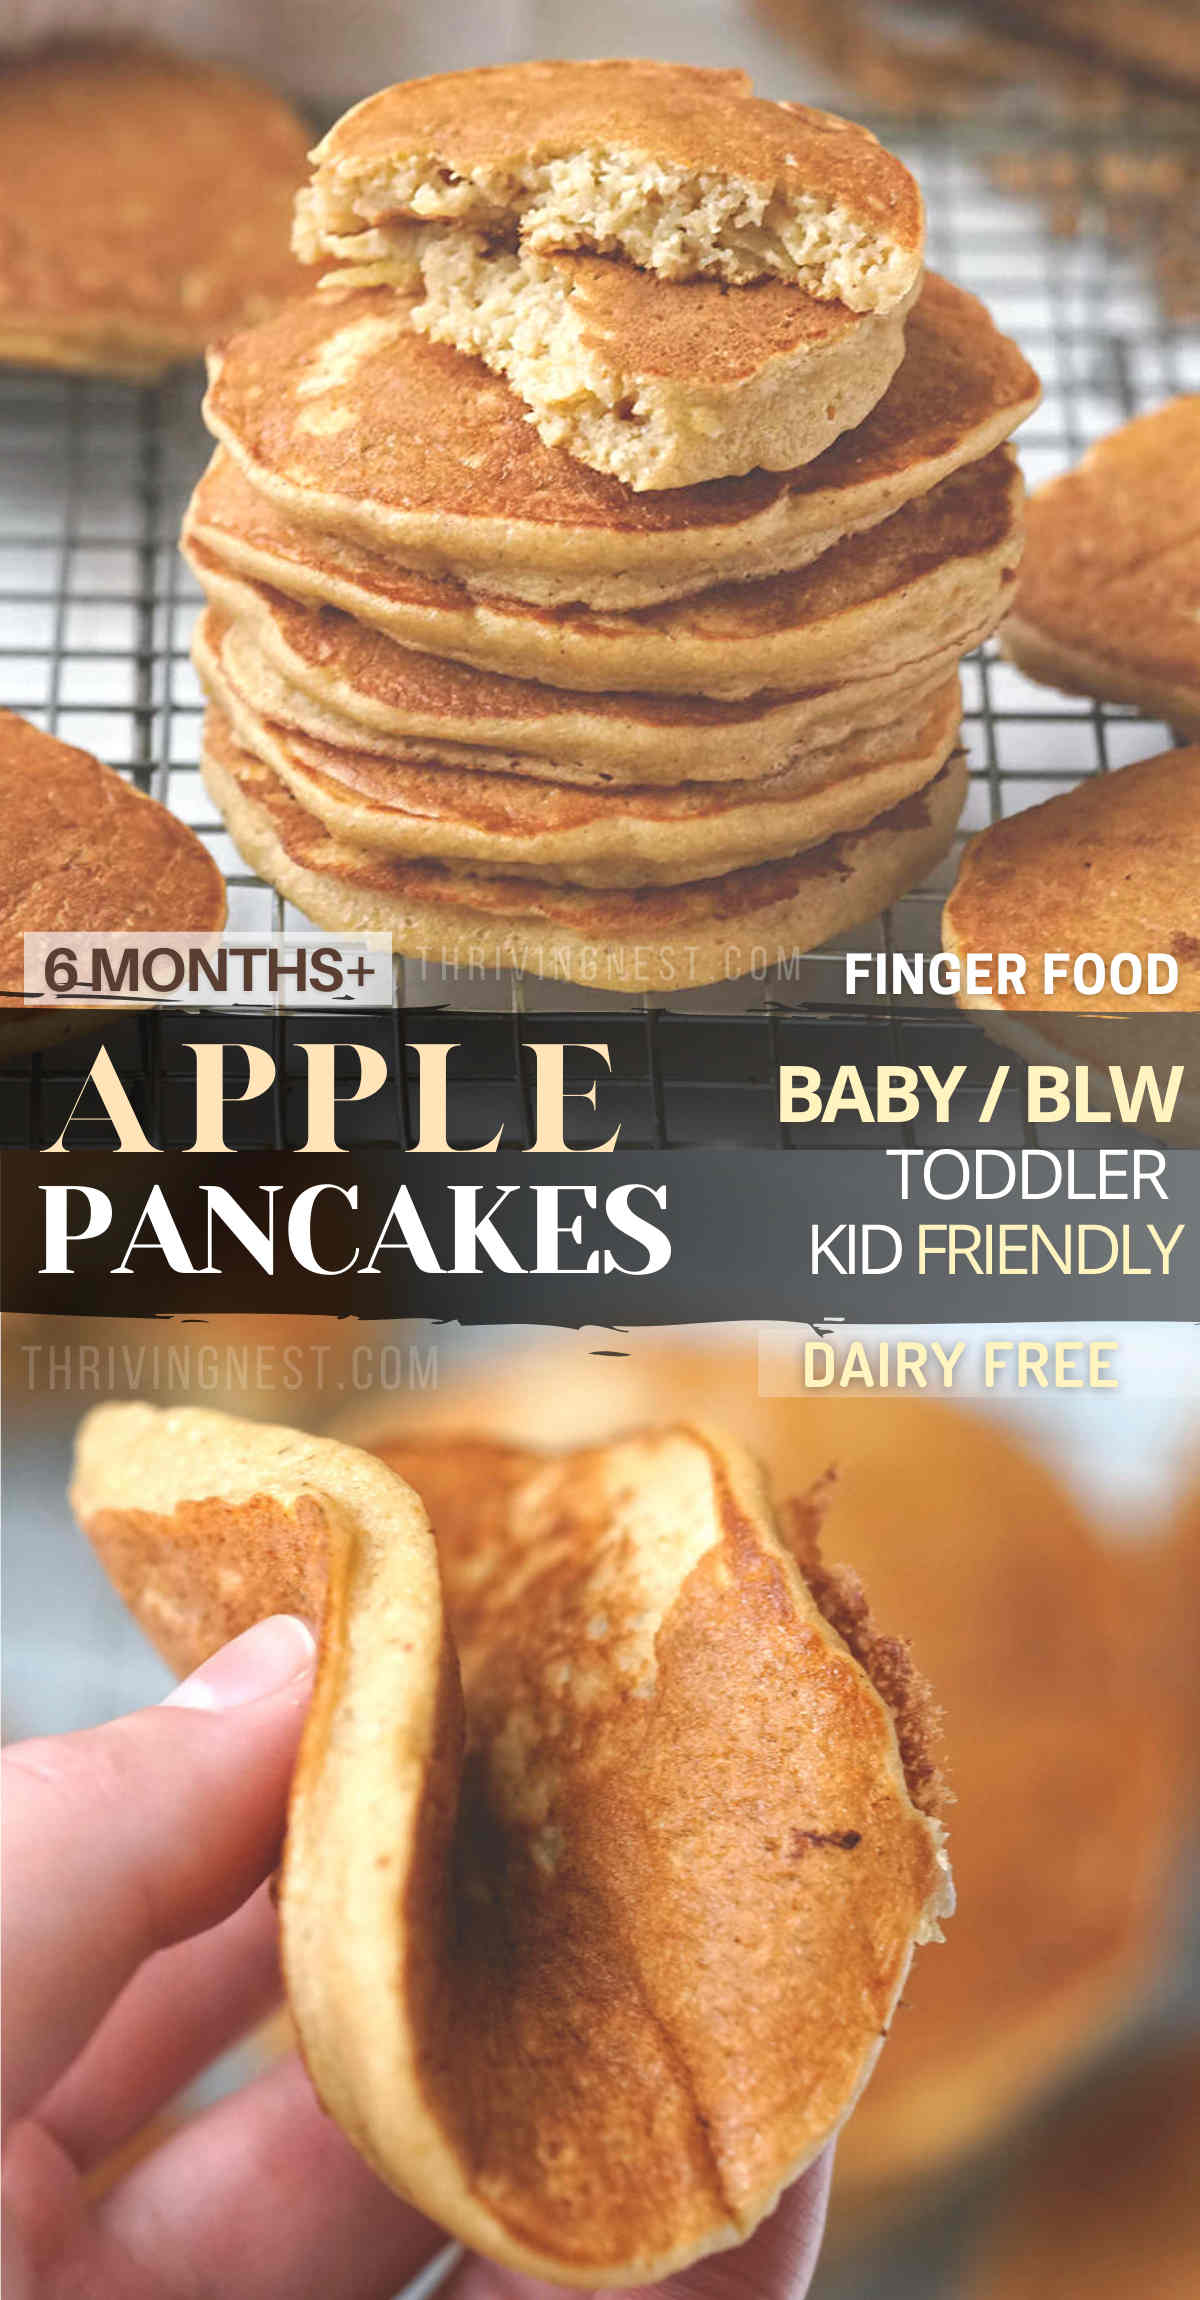 Moist fluffy apple pancakes for baby with a nice texture and flavor from fresh grated apple, apple sauce, oats and cinnamon. The batter for these baby apple pancakes is easy to whip up in just under 10 minutes. Make these apple pancakes for baby led weaning as finger food for breakfasts and freeze the extra. Cold leftover apple oat pancakes make a great after-school snack as well! #applepancakesforbaby #applepancakes #babypancakes #babyledweaning #applesauce #babyapplepancakes #pancakerecipe